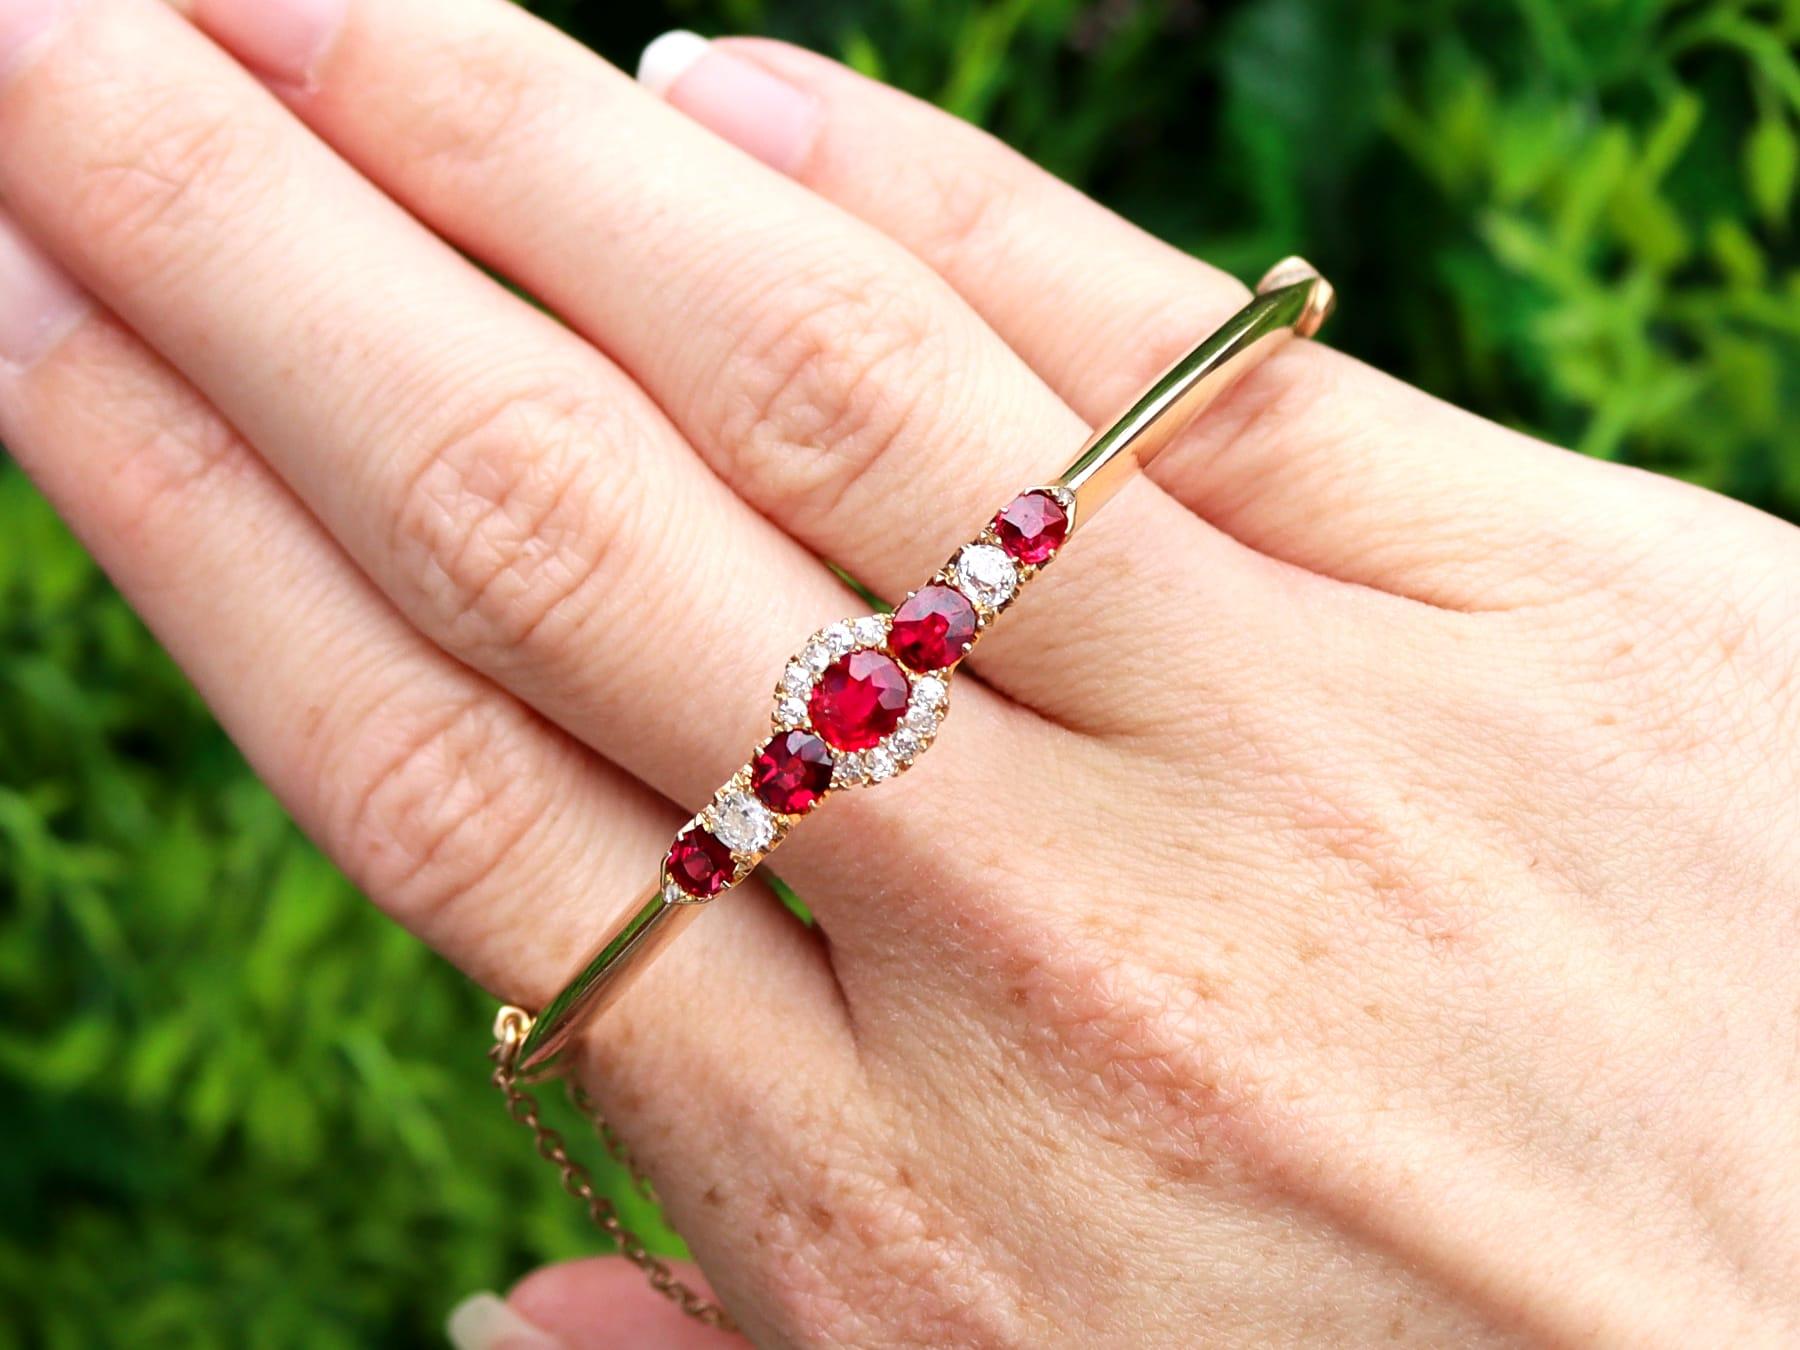 A stunning, fine and impressive antique 1.95 carat ruby and 0.40 carat diamond, 15 karat yellow gold bangle; part of our diverse antique ruby jewellery collections.

This stunning antique bangle has been crafted in 15k yellow gold.

The pierced